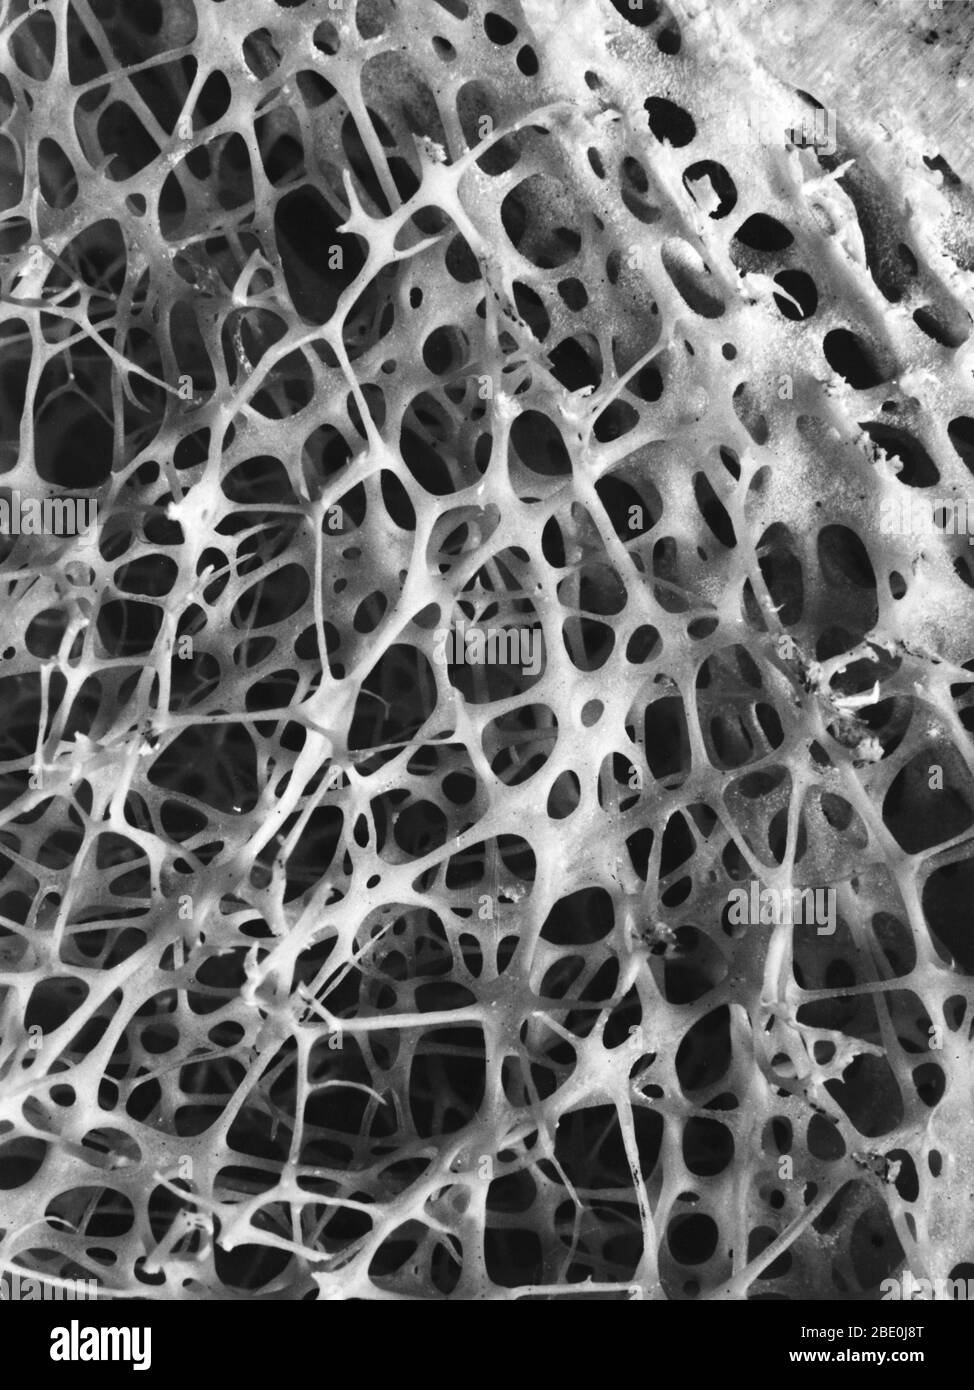 Scanning electron micrograph (SEM) of cancellous (spongy) bone of the human shin. Bone tissue is either compact or cancellous. Compact bone usually makes up the exterior of the bone, while cancellous bone is found in the interior. Cancellous bone is characterized by a honeycomb arrangement of trabeculae. These structures help to provide support and strength. The spaces within this tissue normally contain bone marrow, a blood forming substance. Stock Photo